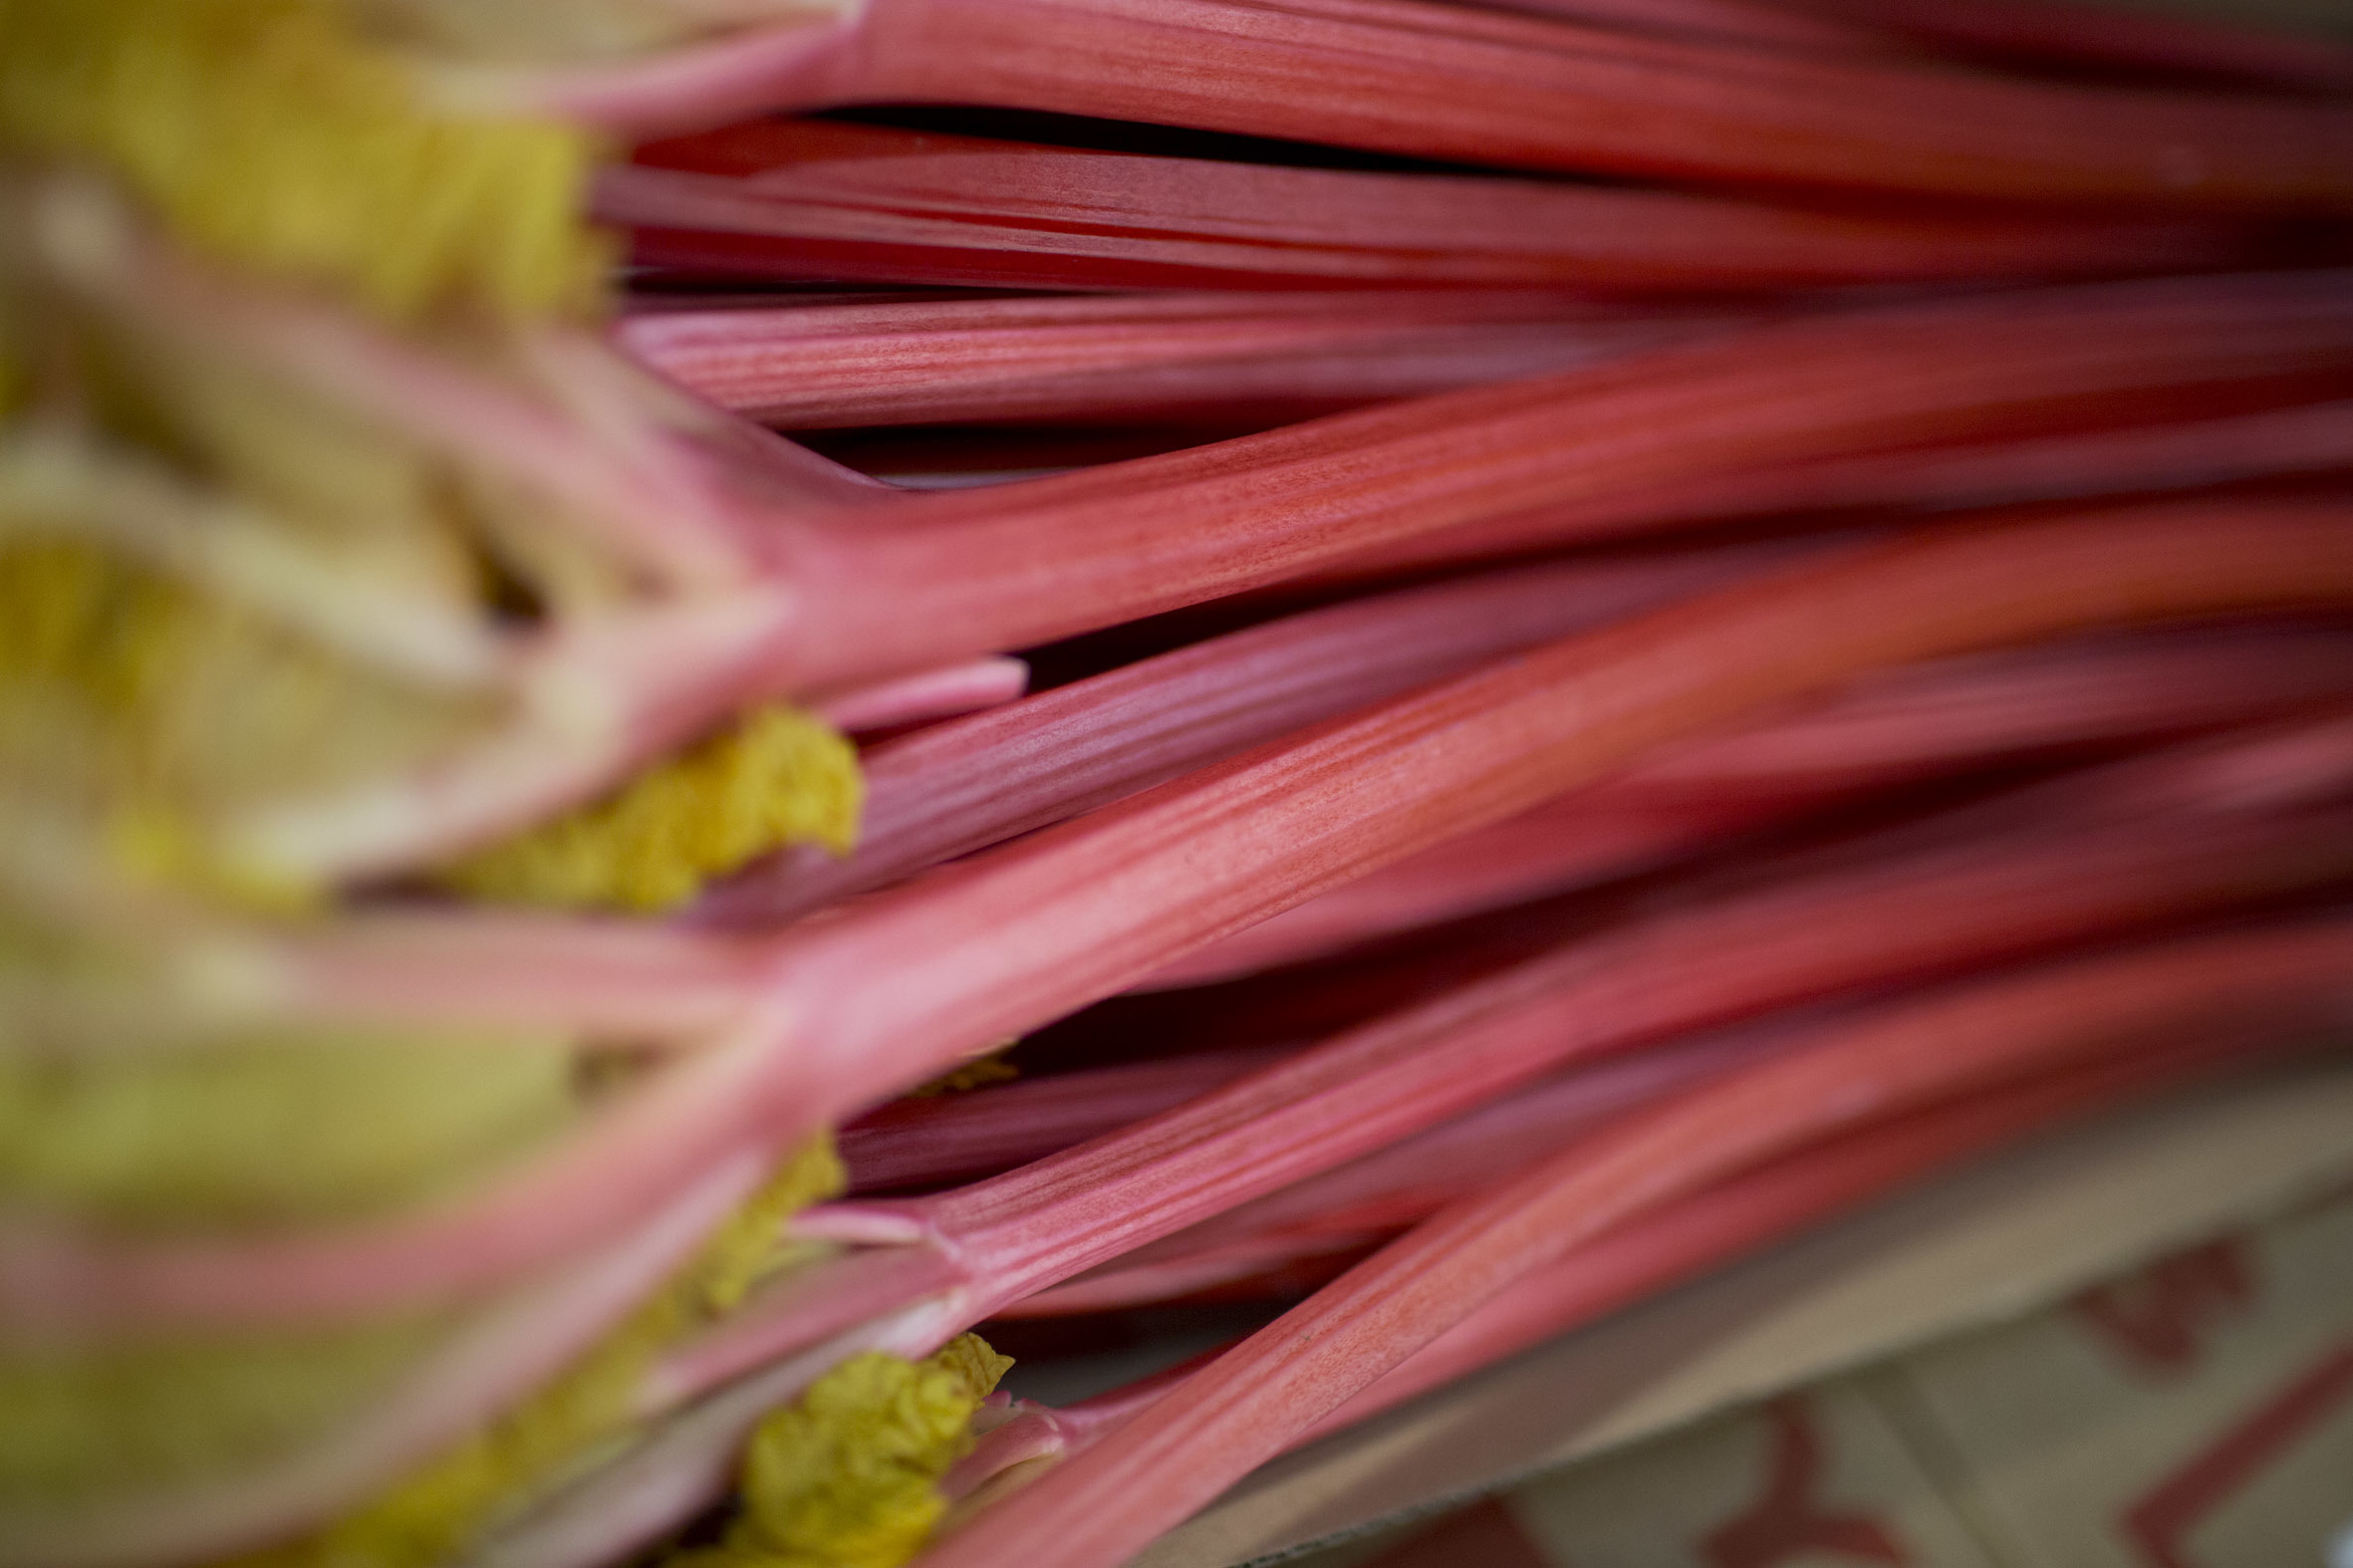 fruit-and-vegetable-market-report-march-2014-forced-rhubarb.jpg?mtime=20170922112632#asset:11326